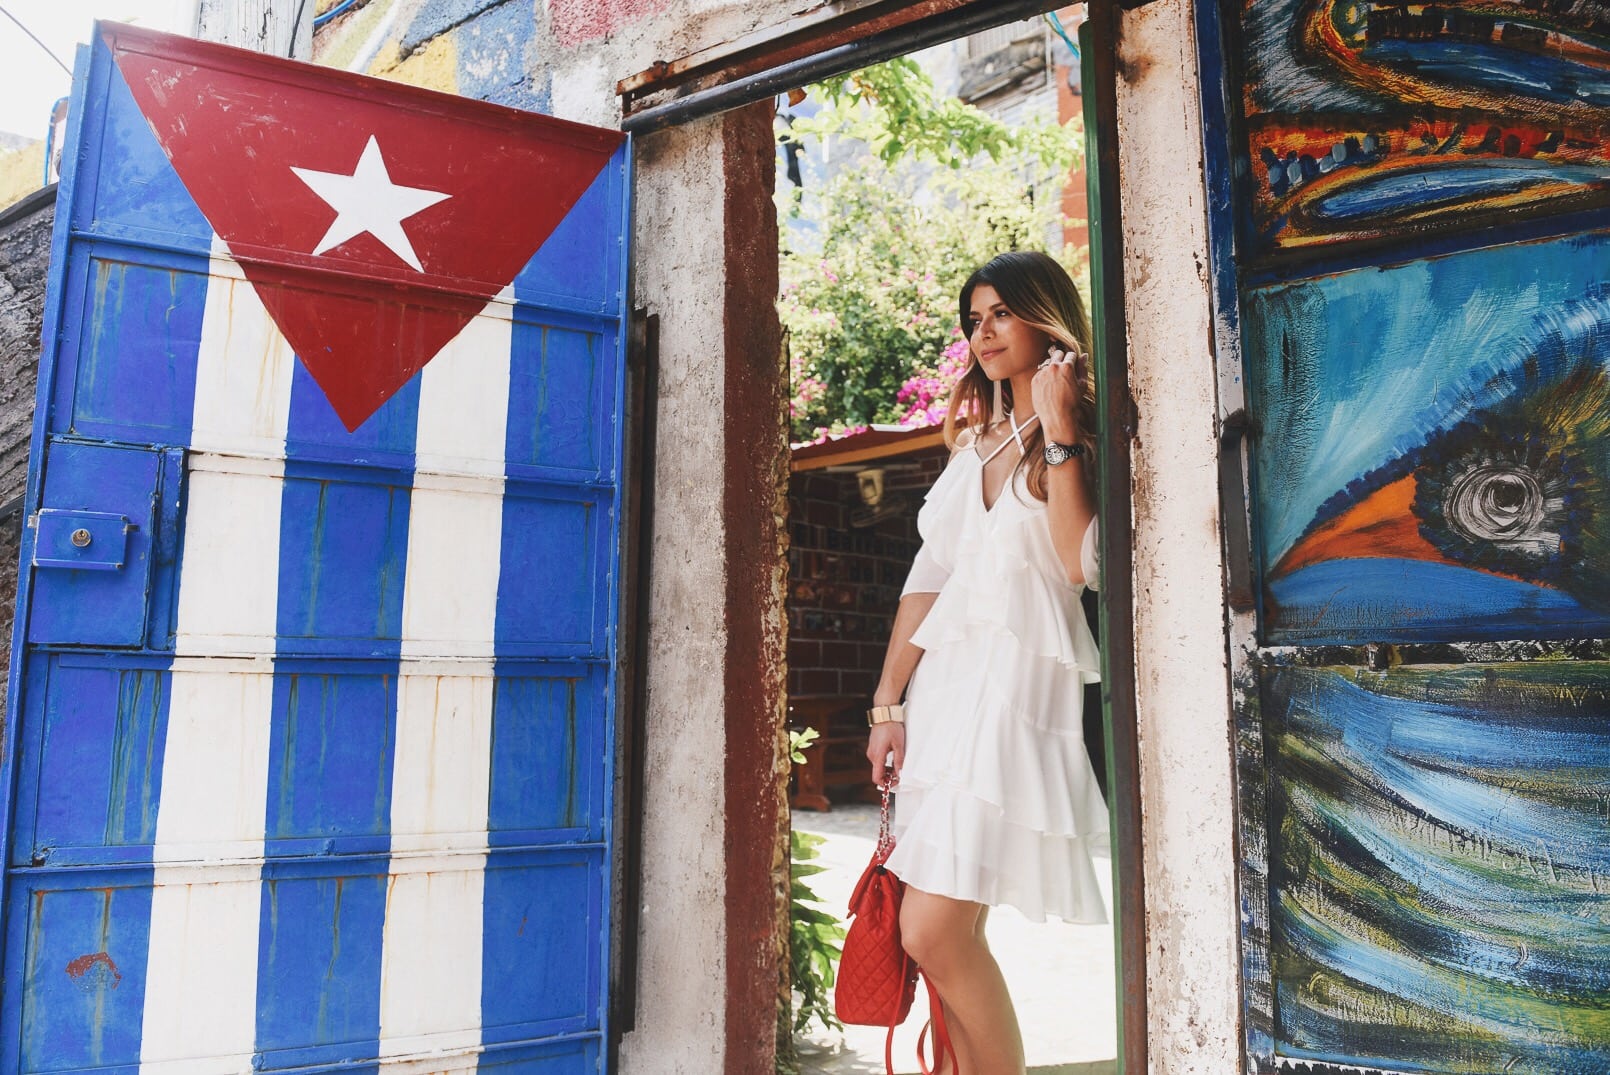 CHANEL Editorial in Cuba, Ruffle White Dress, The Girl From Panama @pamhetlinger